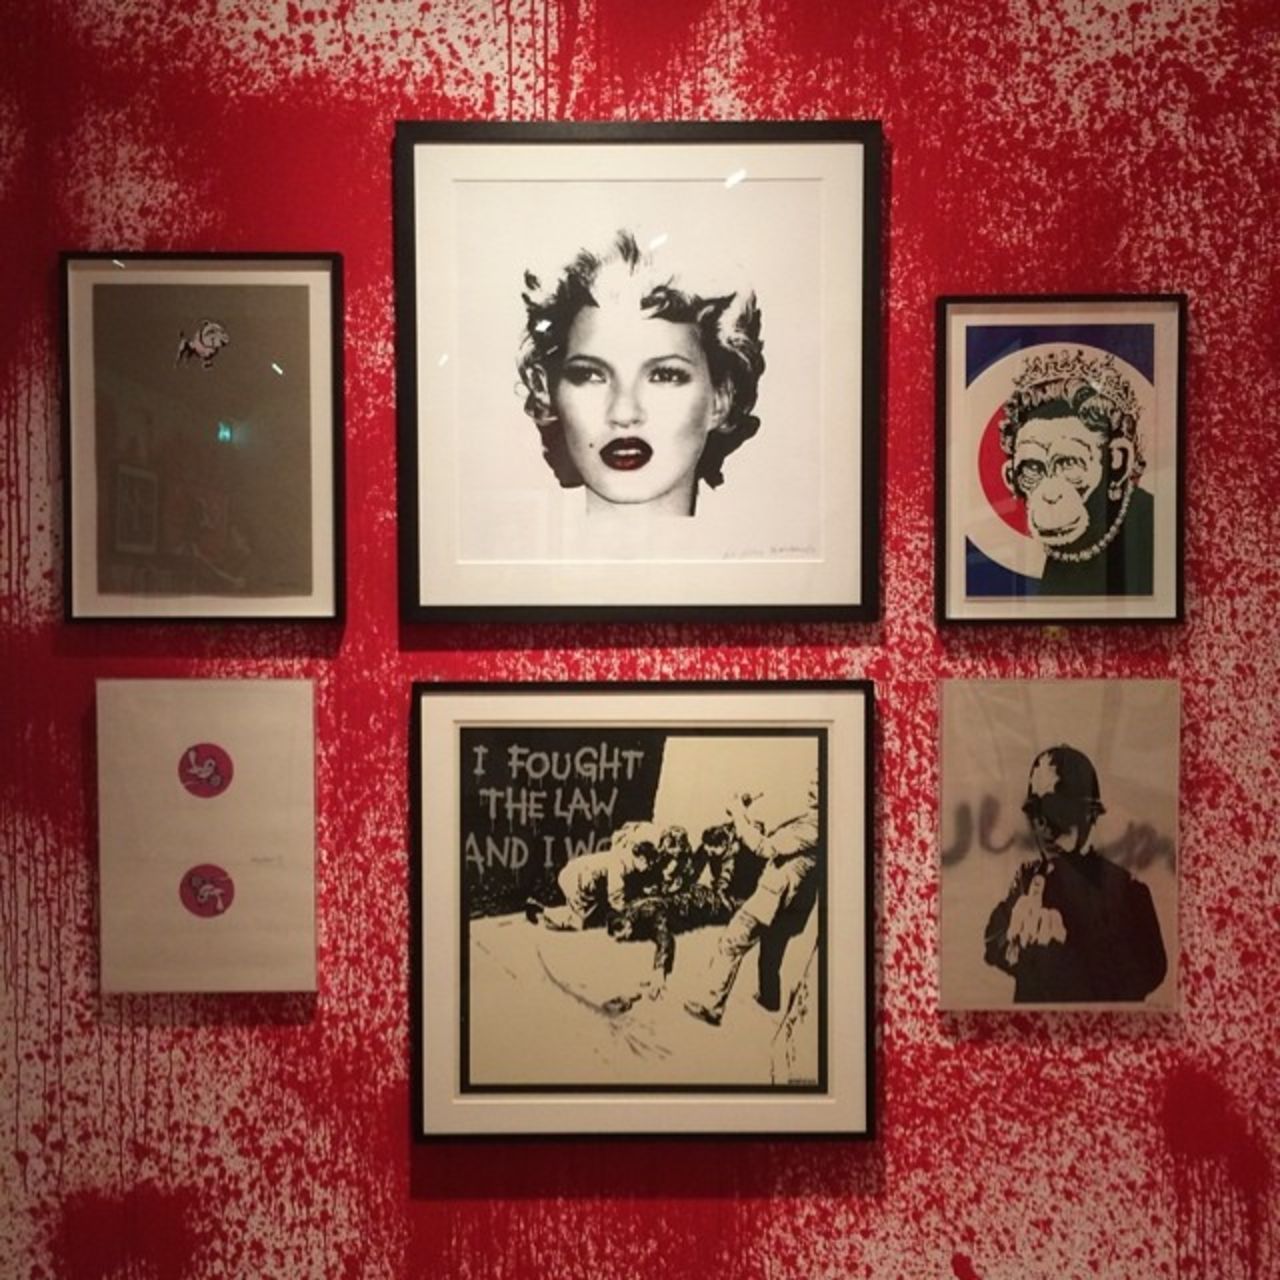 "These are six Banksy prints from a show I did for Sotheby's S2 in 2014, taken from my personal collection. I warned Sotheby's how busy the show would be but I'm not sure they believed me... They had over 15,000 people in two weeks. I think it was one of the busiest shows they've ever had."